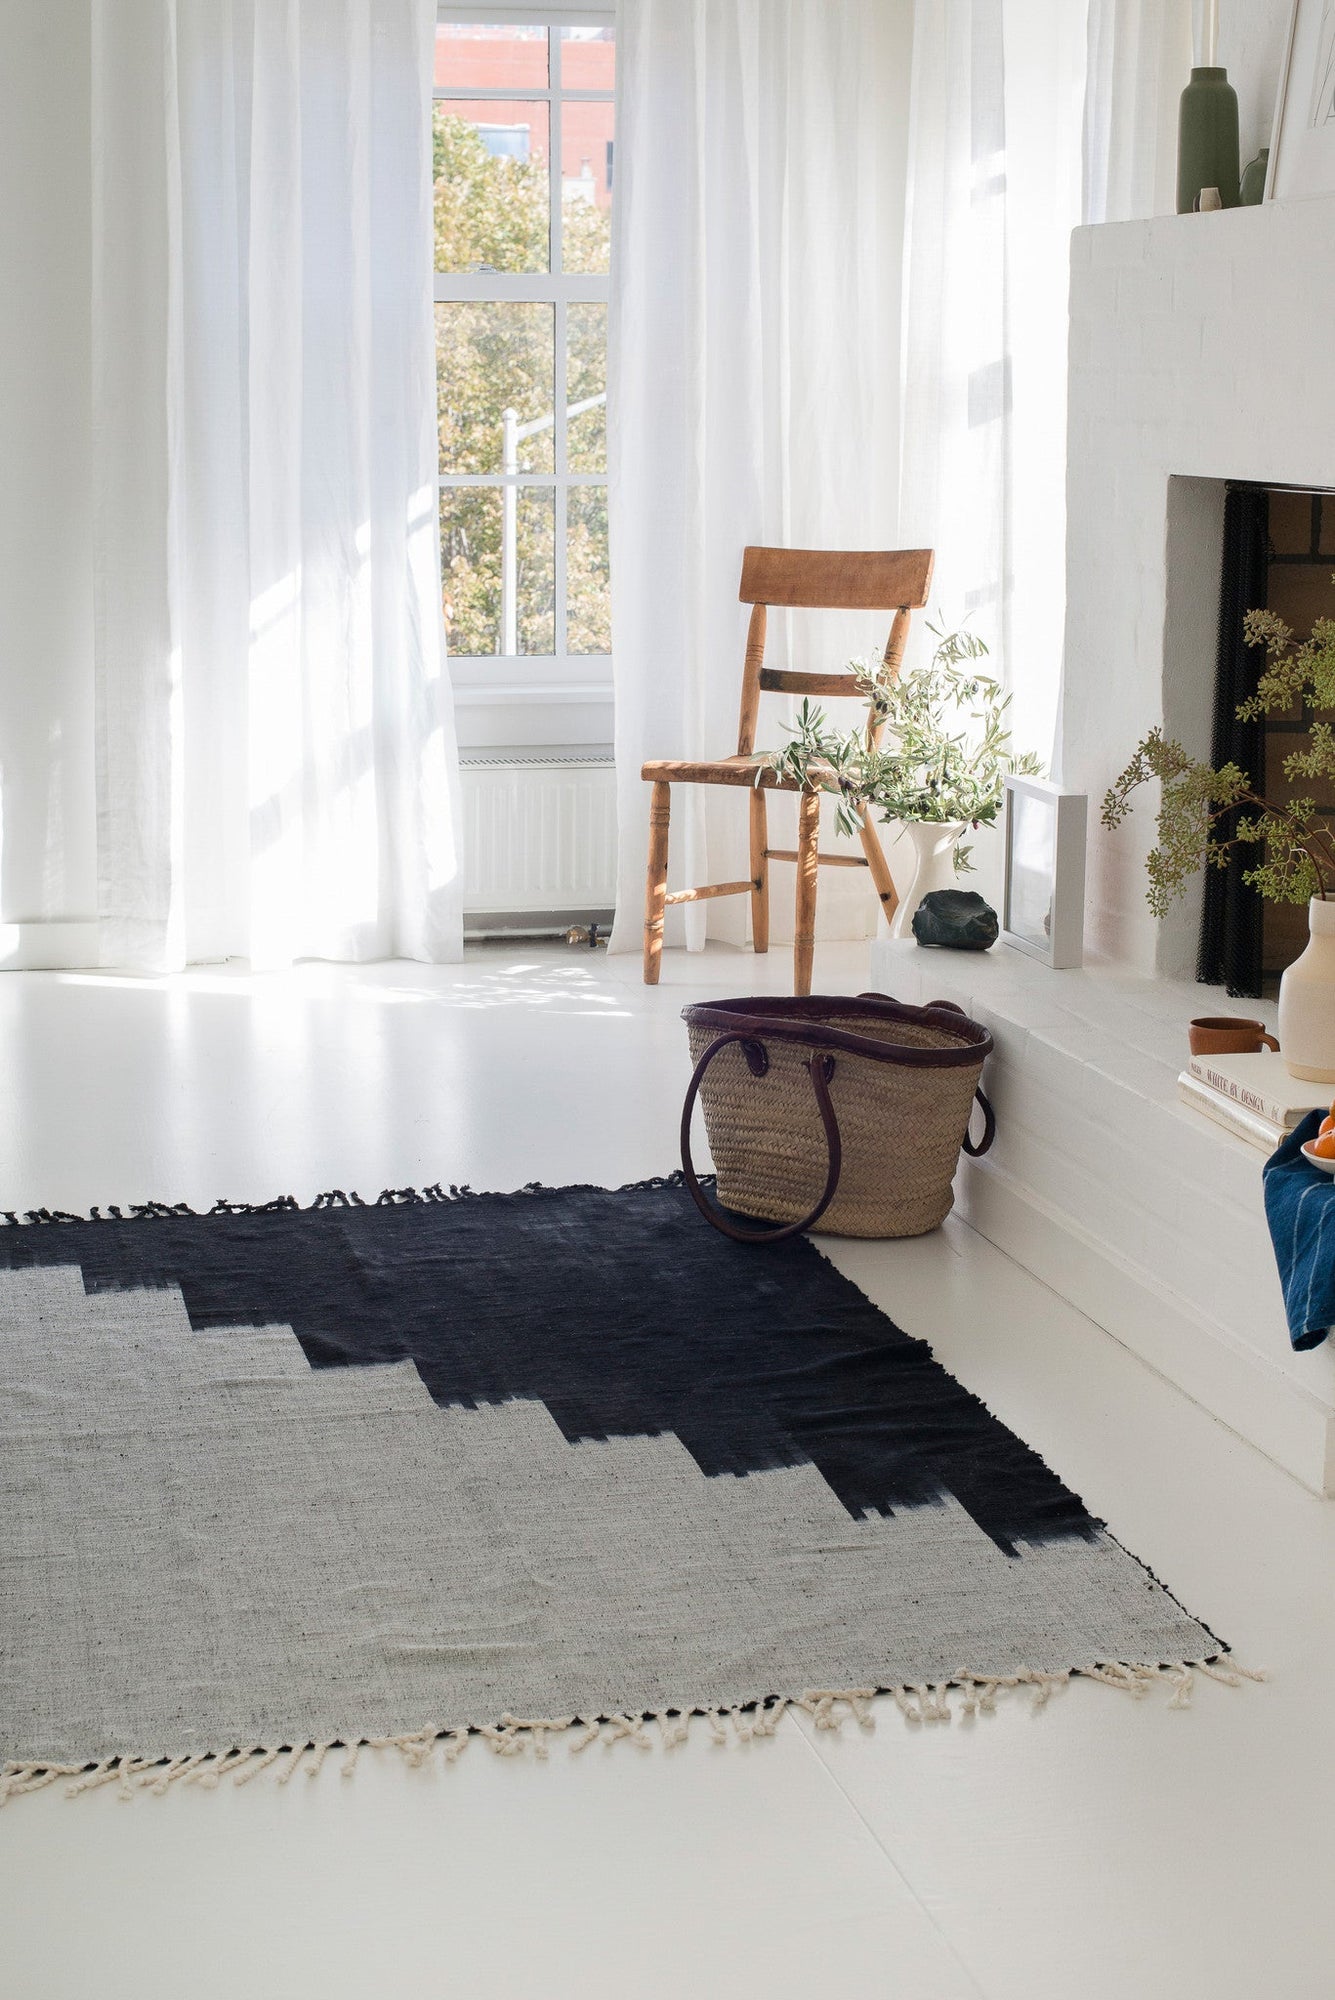 Sample Sale Francisco Stairstep Rug - 1 available